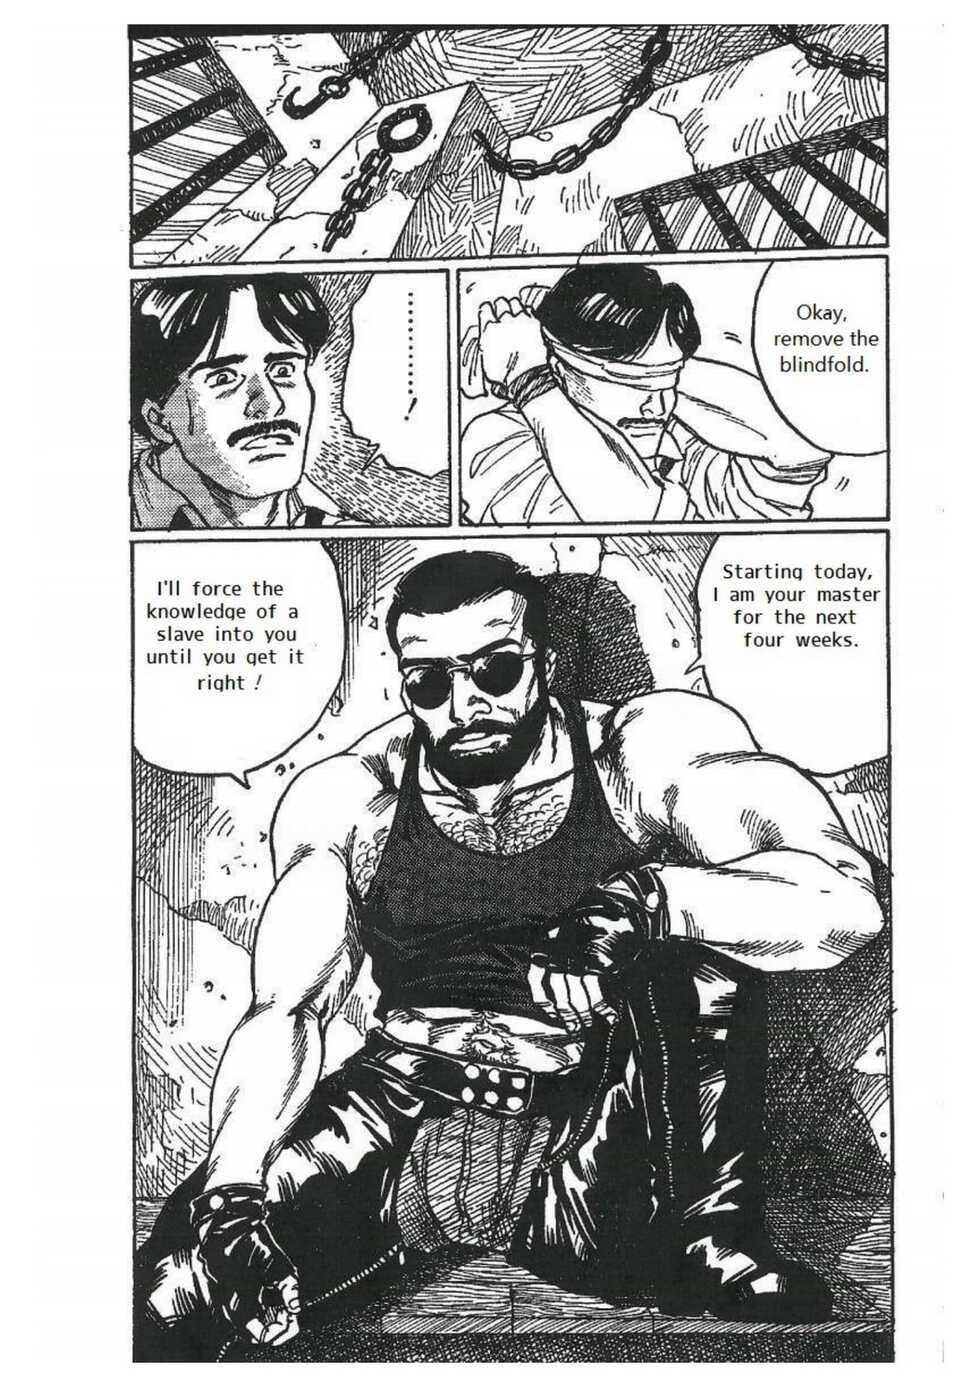 [Gengoroh Tagame] Chokyoshi (The Slave Trainer) [Eng] - Page 3